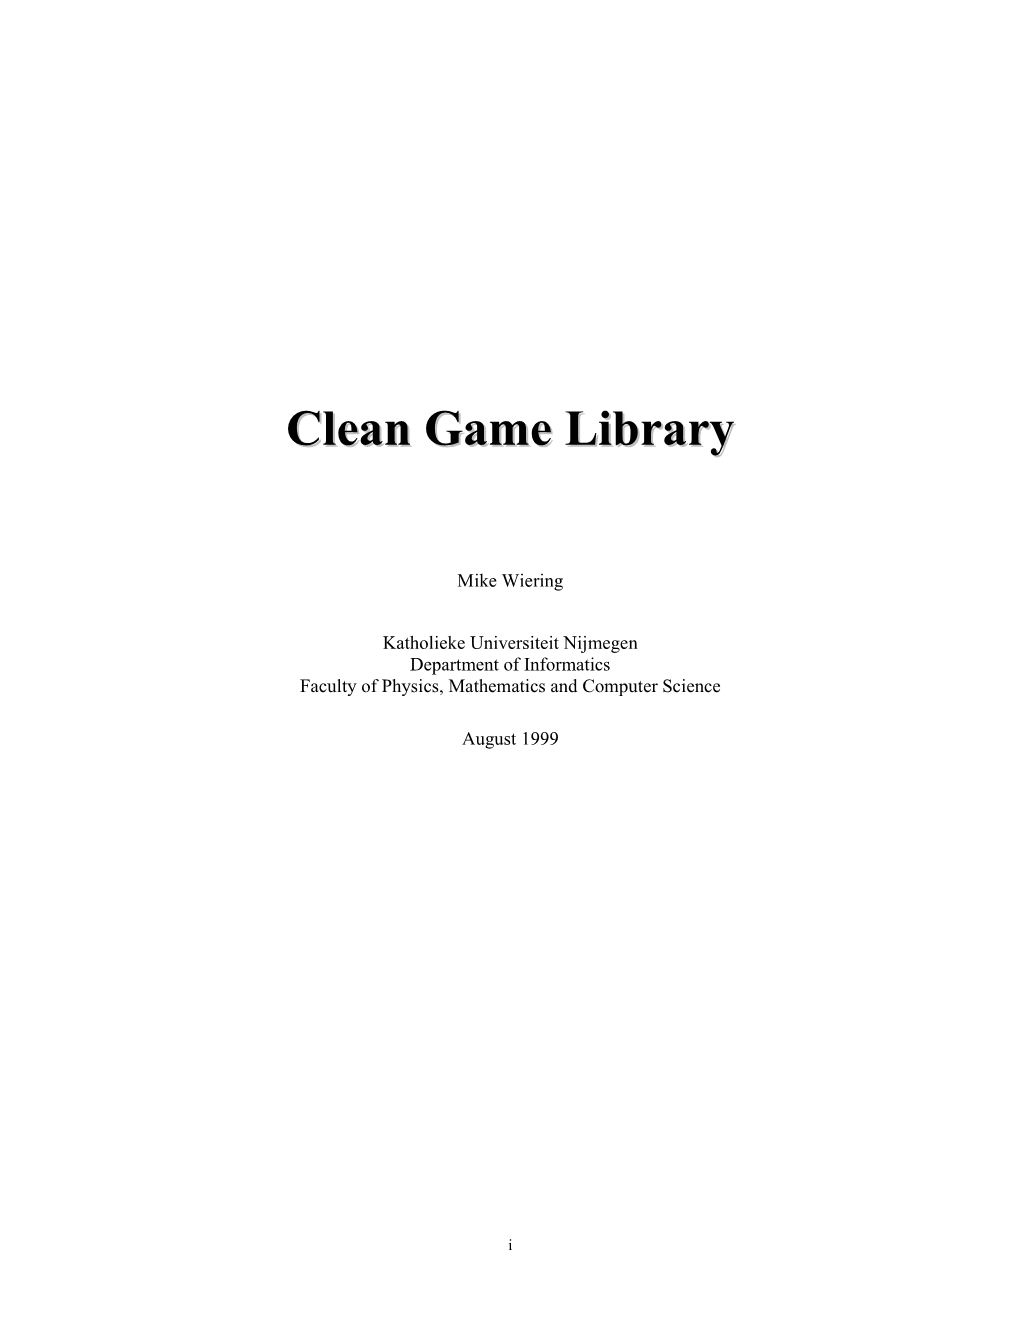 Clean Game Library ZIP File, CGL.ZIP, Which Can Be Downloaded From